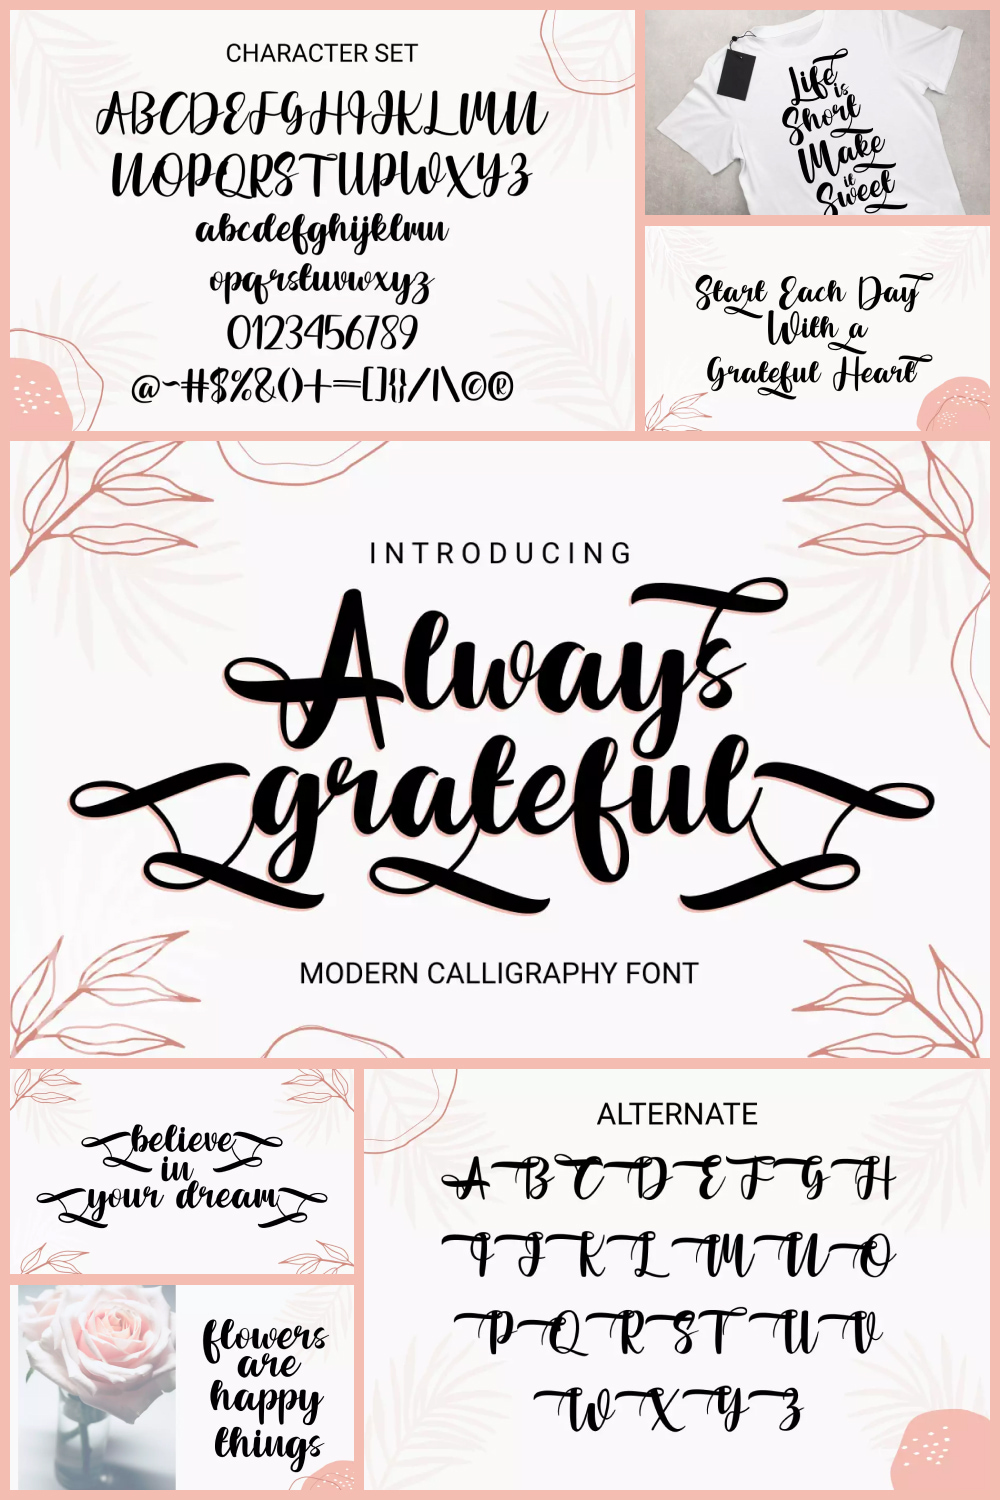 Collage with examples of modern calligraphic font.